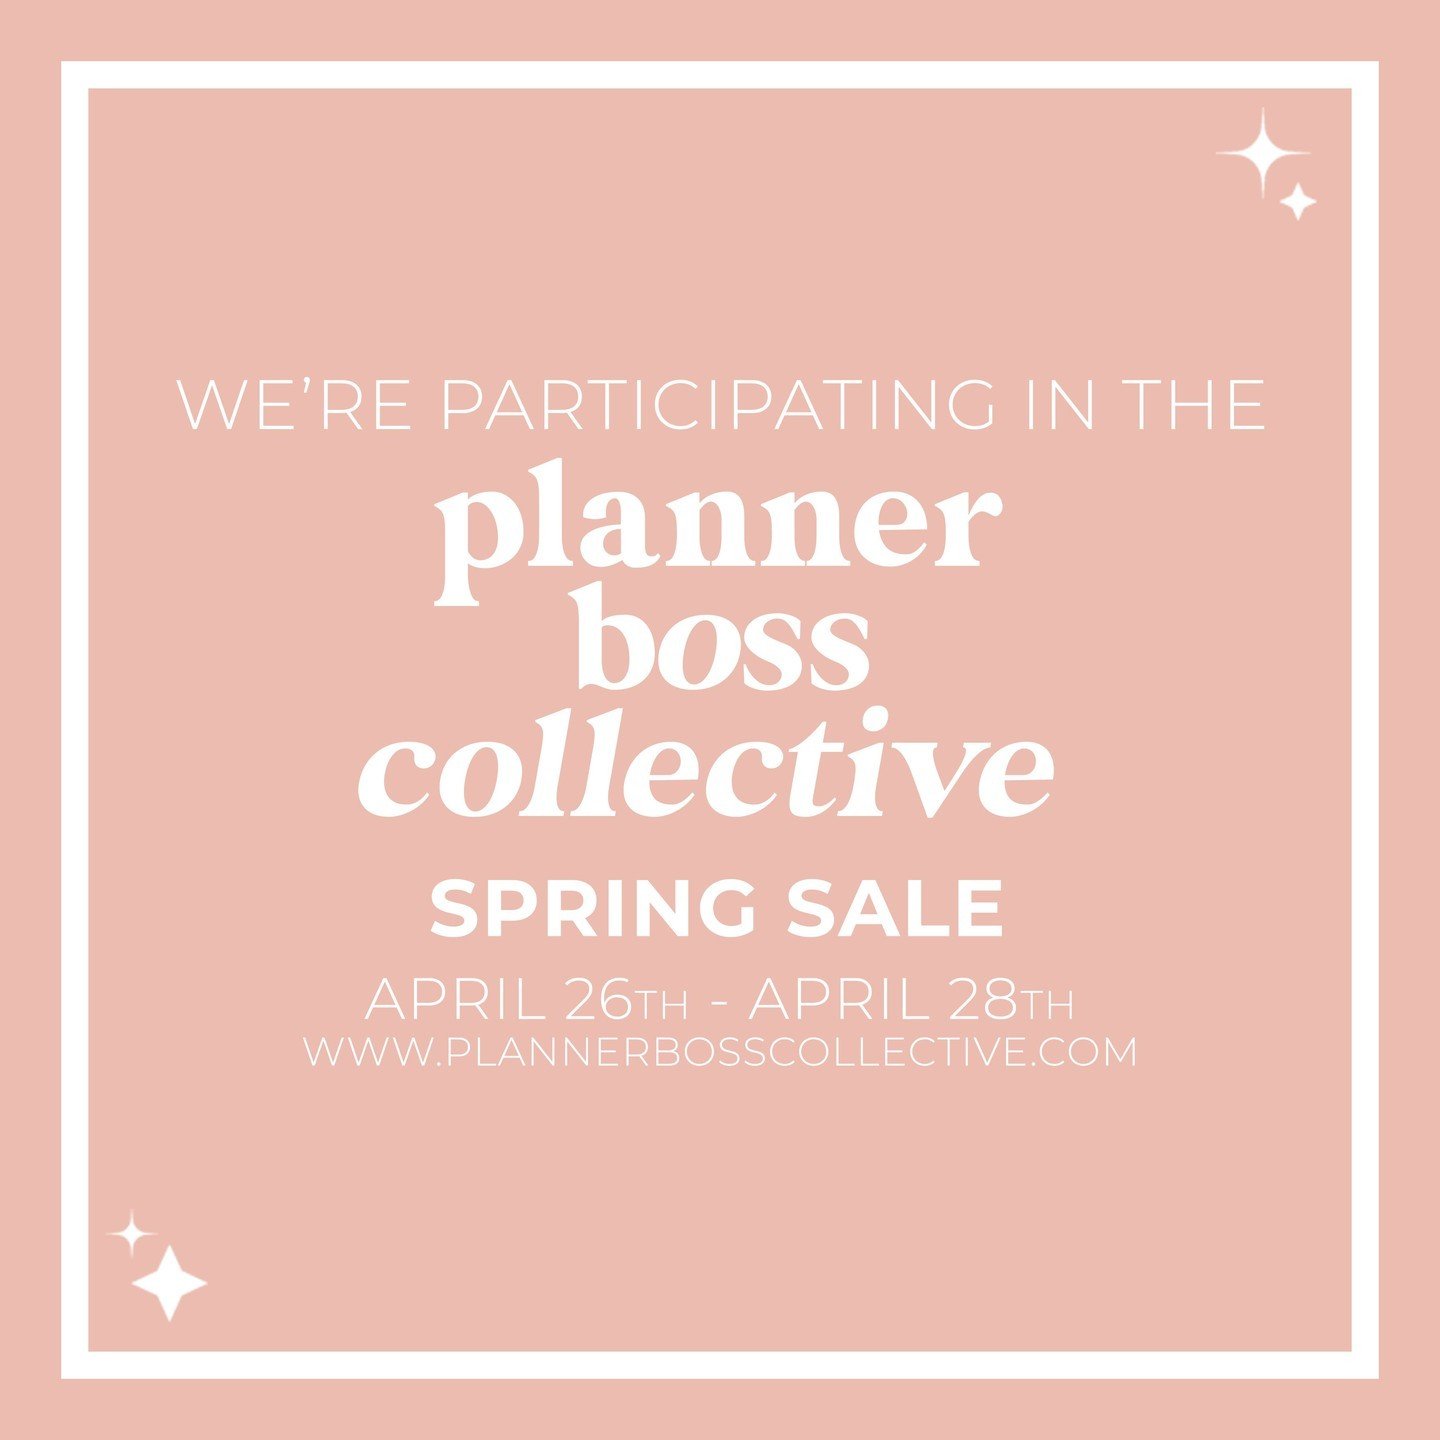 Hello and happy Wednesday! 🌟⁣
I'm super excited to announce that Design Lovely Studio will be participating in the Planner Boss Collective sale on April 26-28! ⁣
⁣
🎉 I'm preparing a lot of new collections, so stay tuned for sneak peeks over the nex